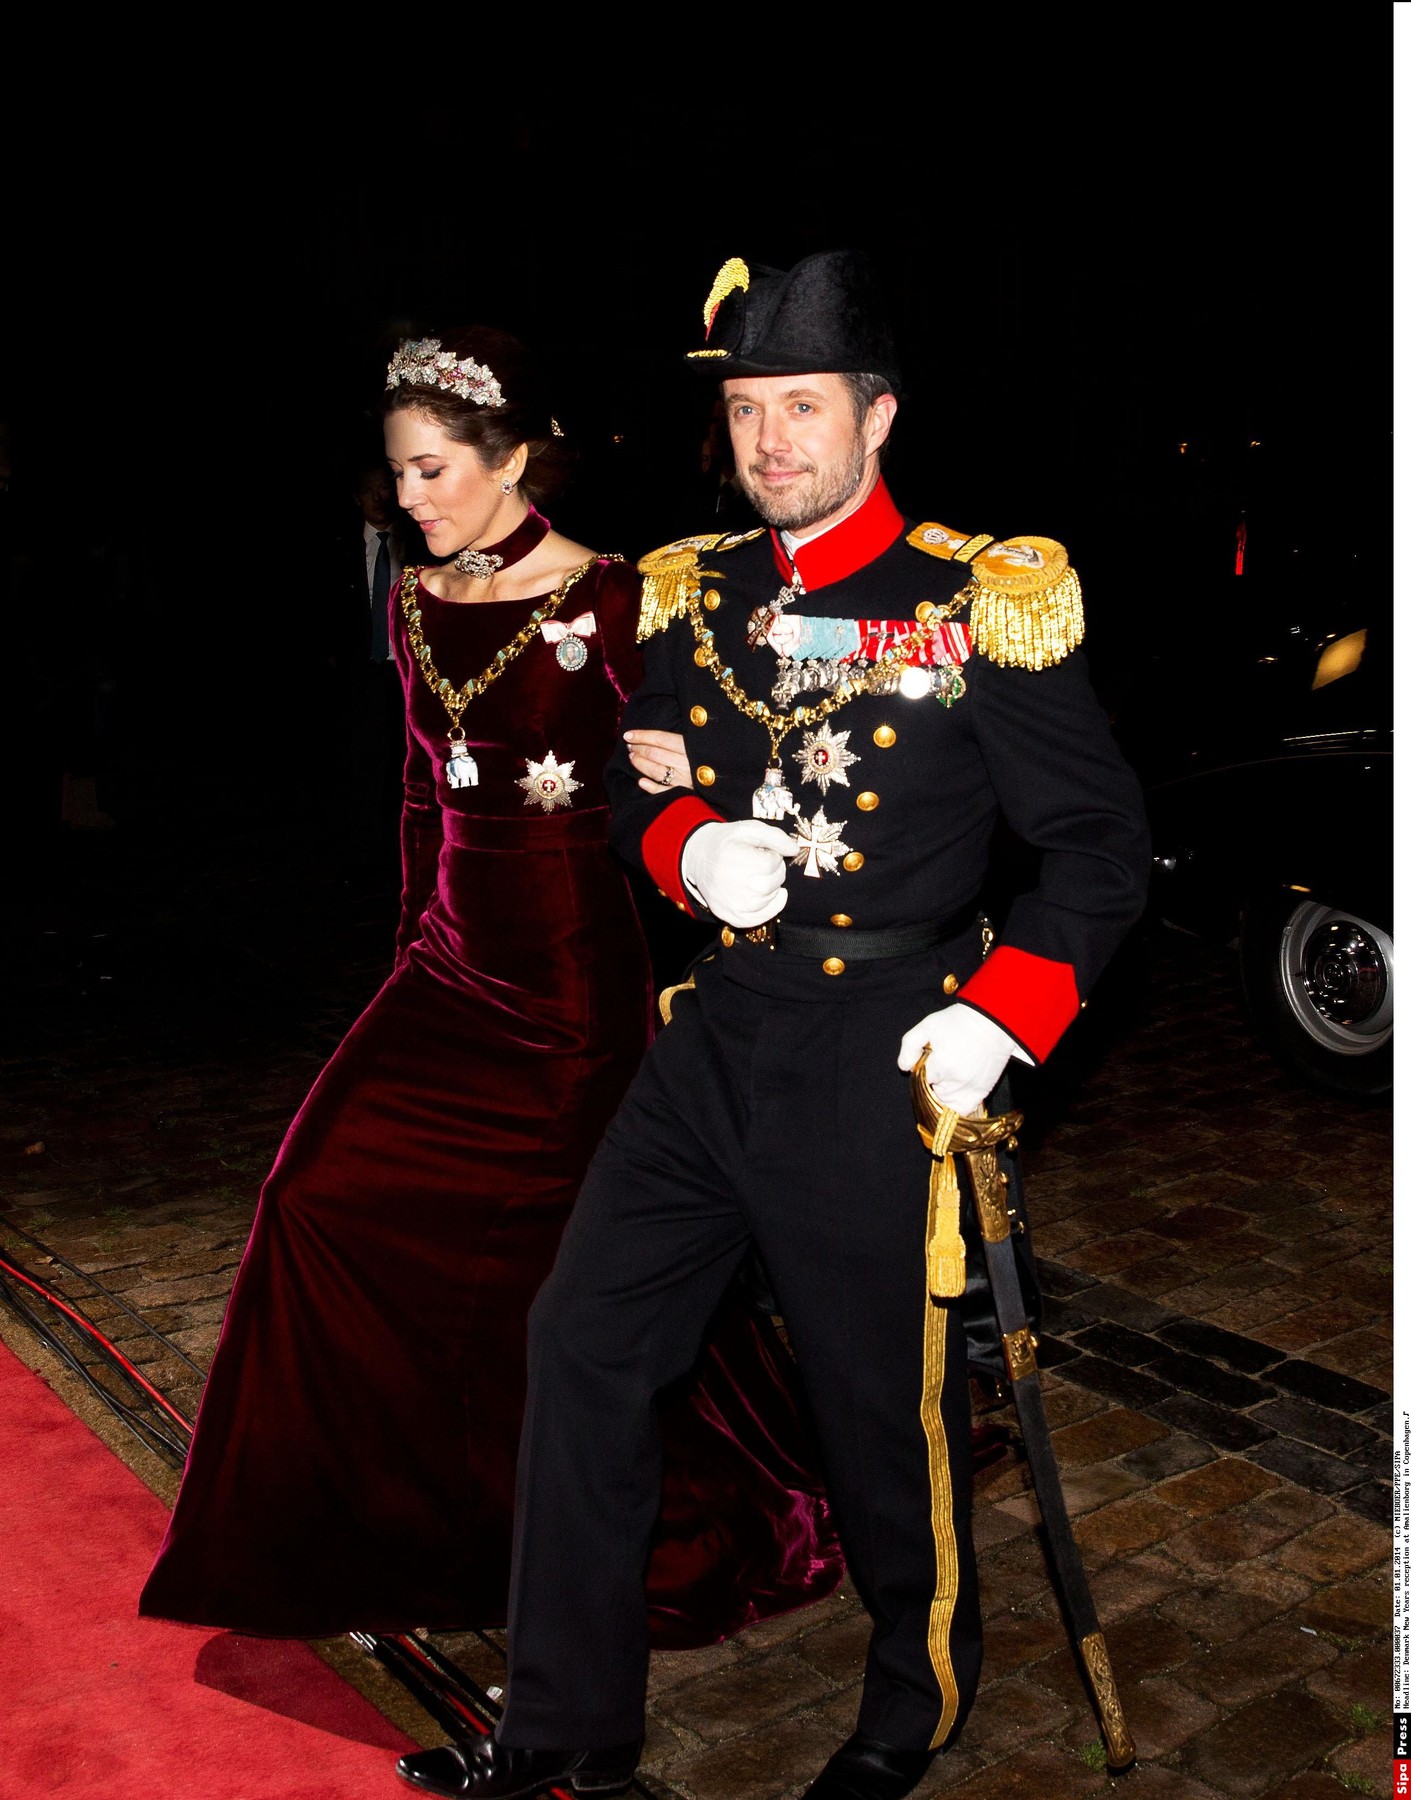 01-01-2014 Amalienborg Princess Mary and Prince Frederik at the New Years reception at Amalienborg in Copenhagen.

' PPE/Nieboer
/PICTUREPRESSEUROPE_1517.37/Credit:NIEBOER/PPE/SIPA/1401021543, Image: 227855680, License: Rights-managed, Restrictions: , Model Release: no, Credit line: NIEBOER/PPE / Sipa Press / Profimedia